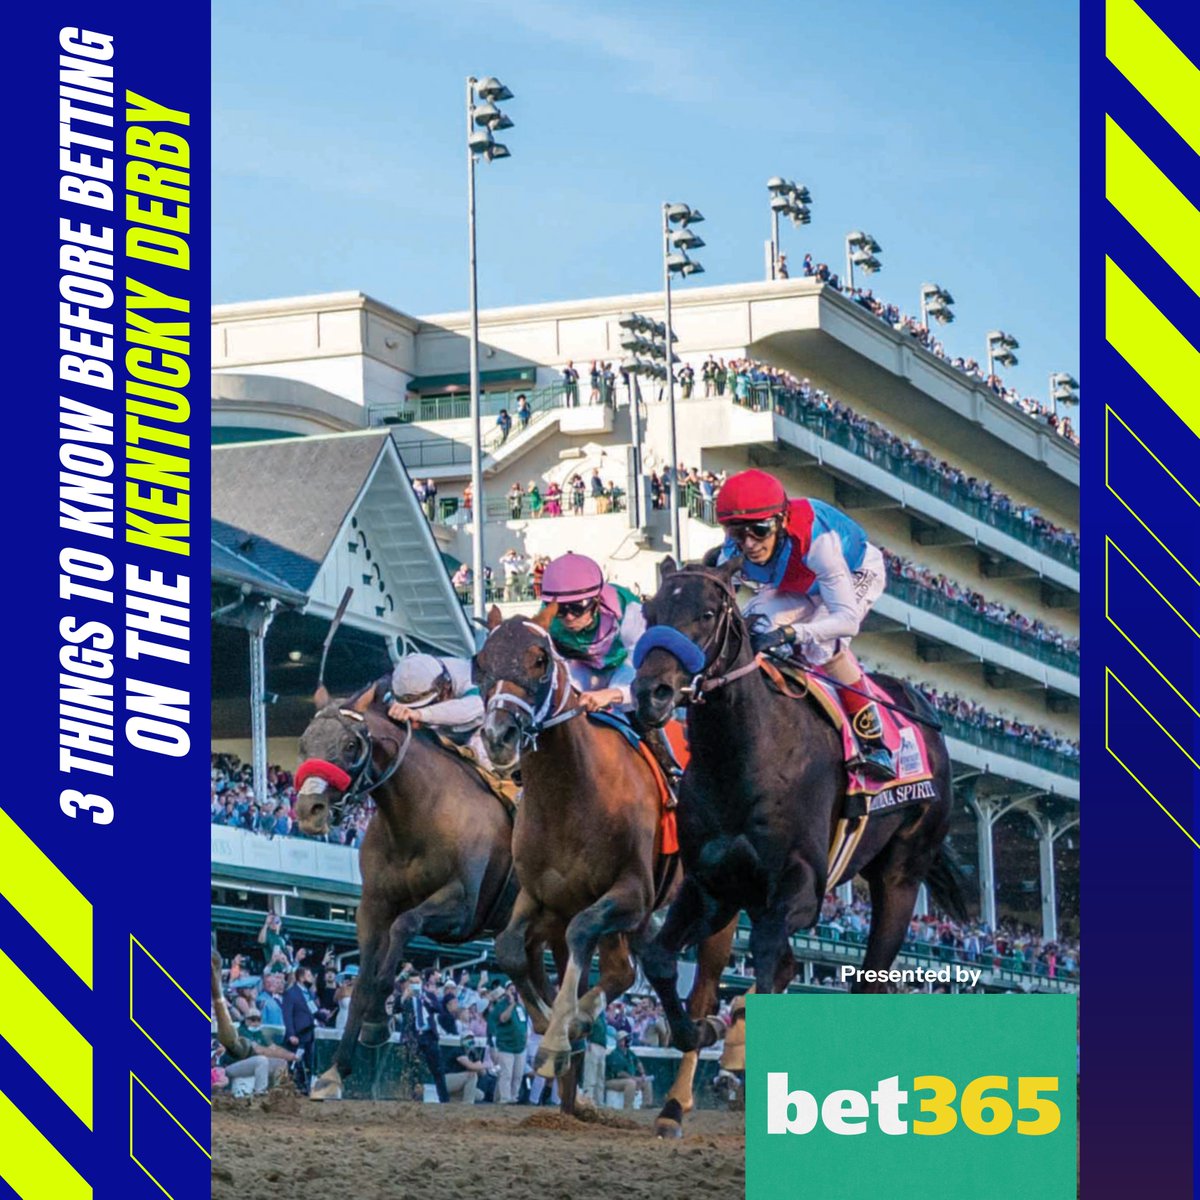 Post Time, Favourite, How to Bet… we got you 🤜🤛 @KentuckyDerby #KyDerby @bet365ca 

a 🧵